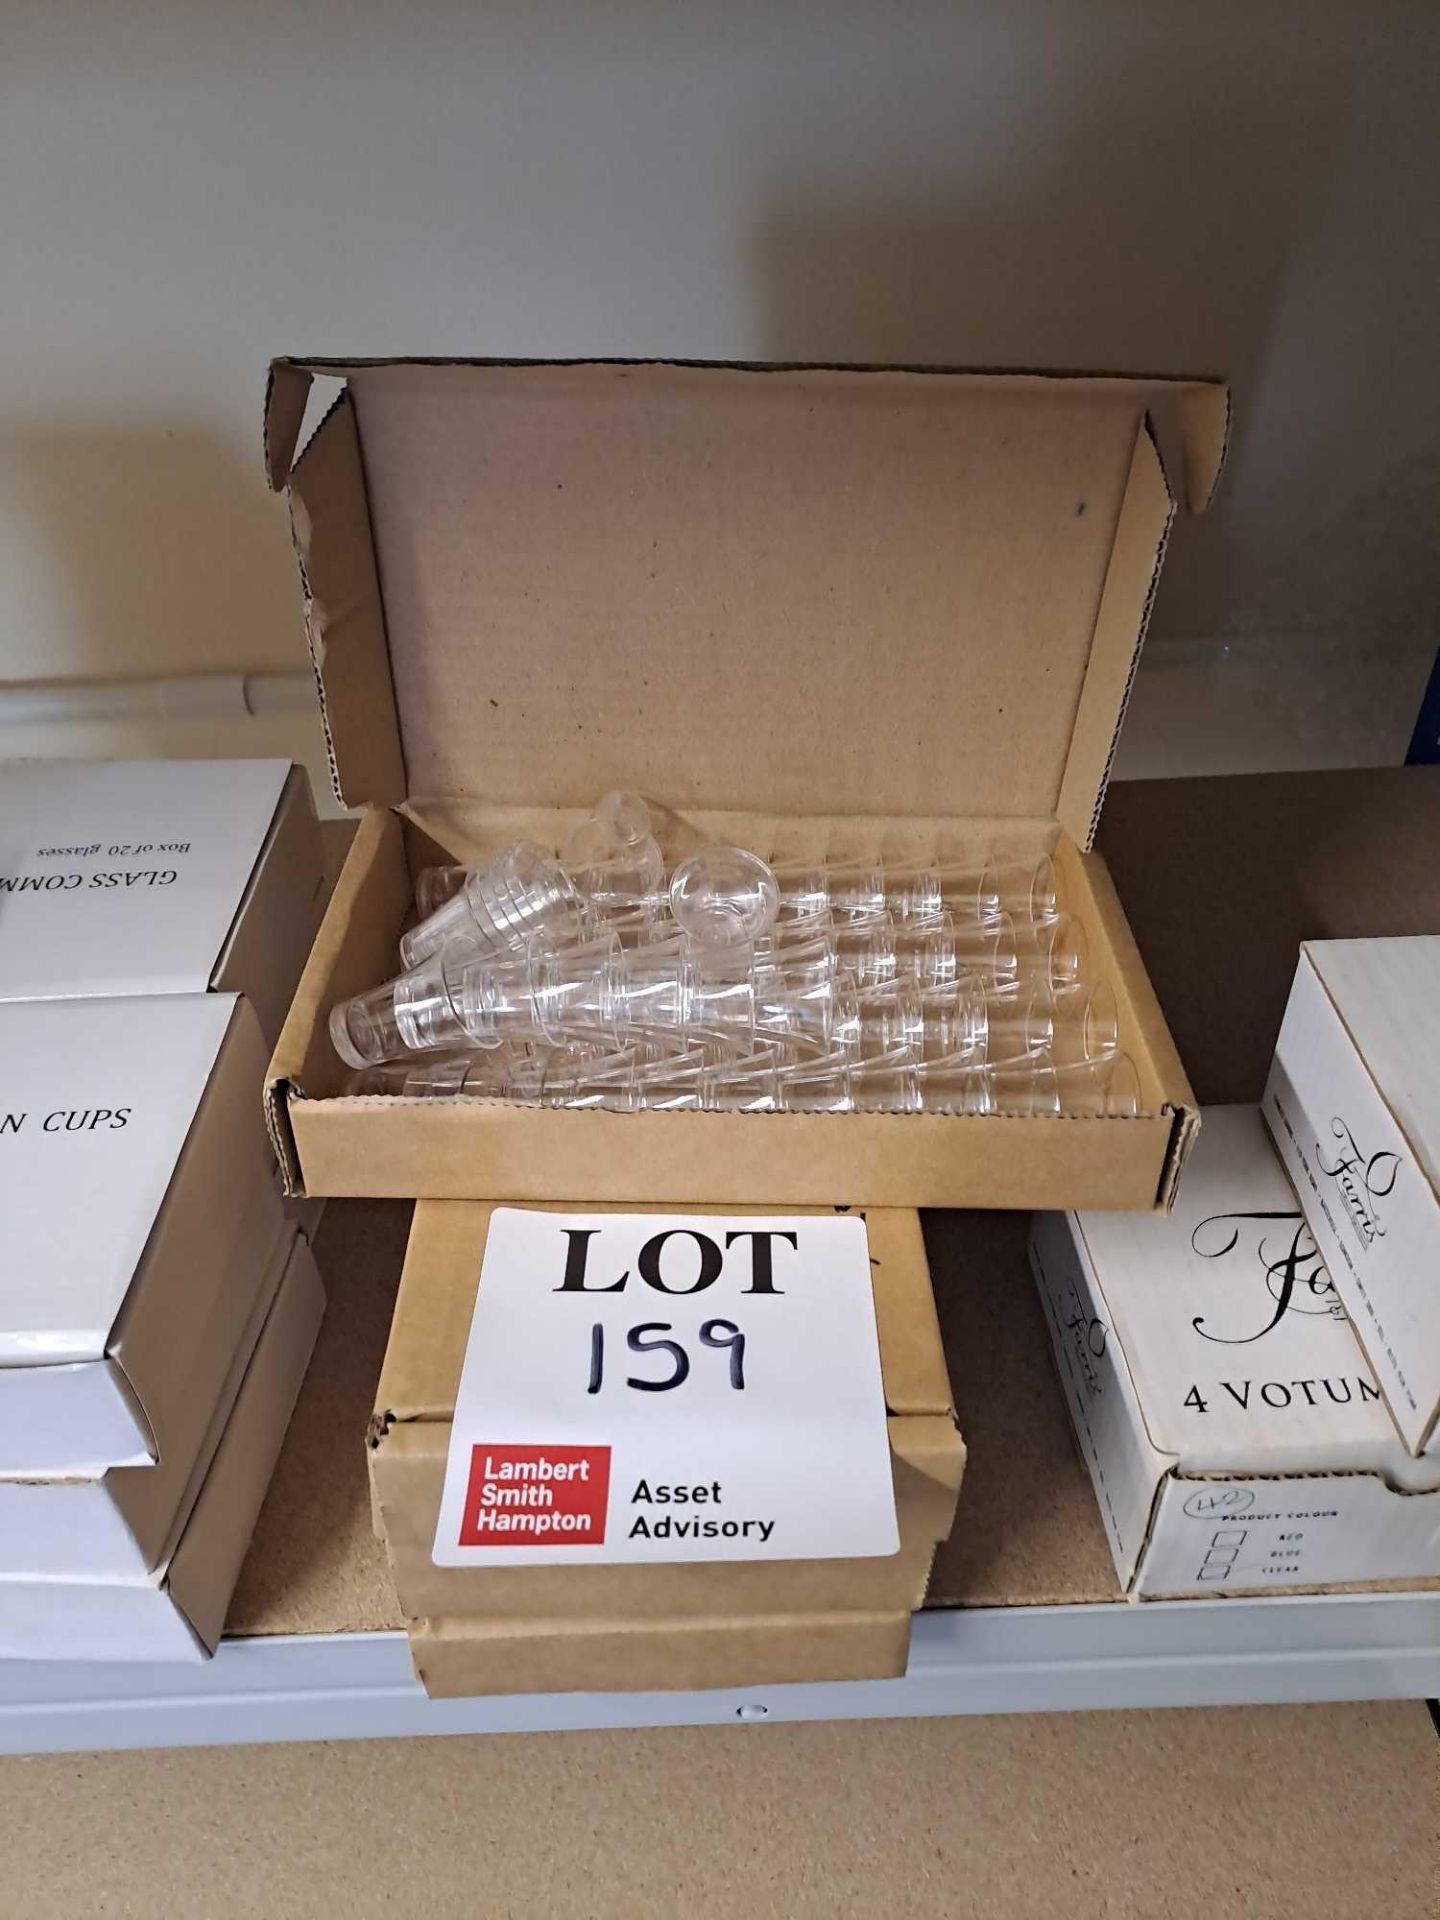 Eight boxes of plastic communion cups